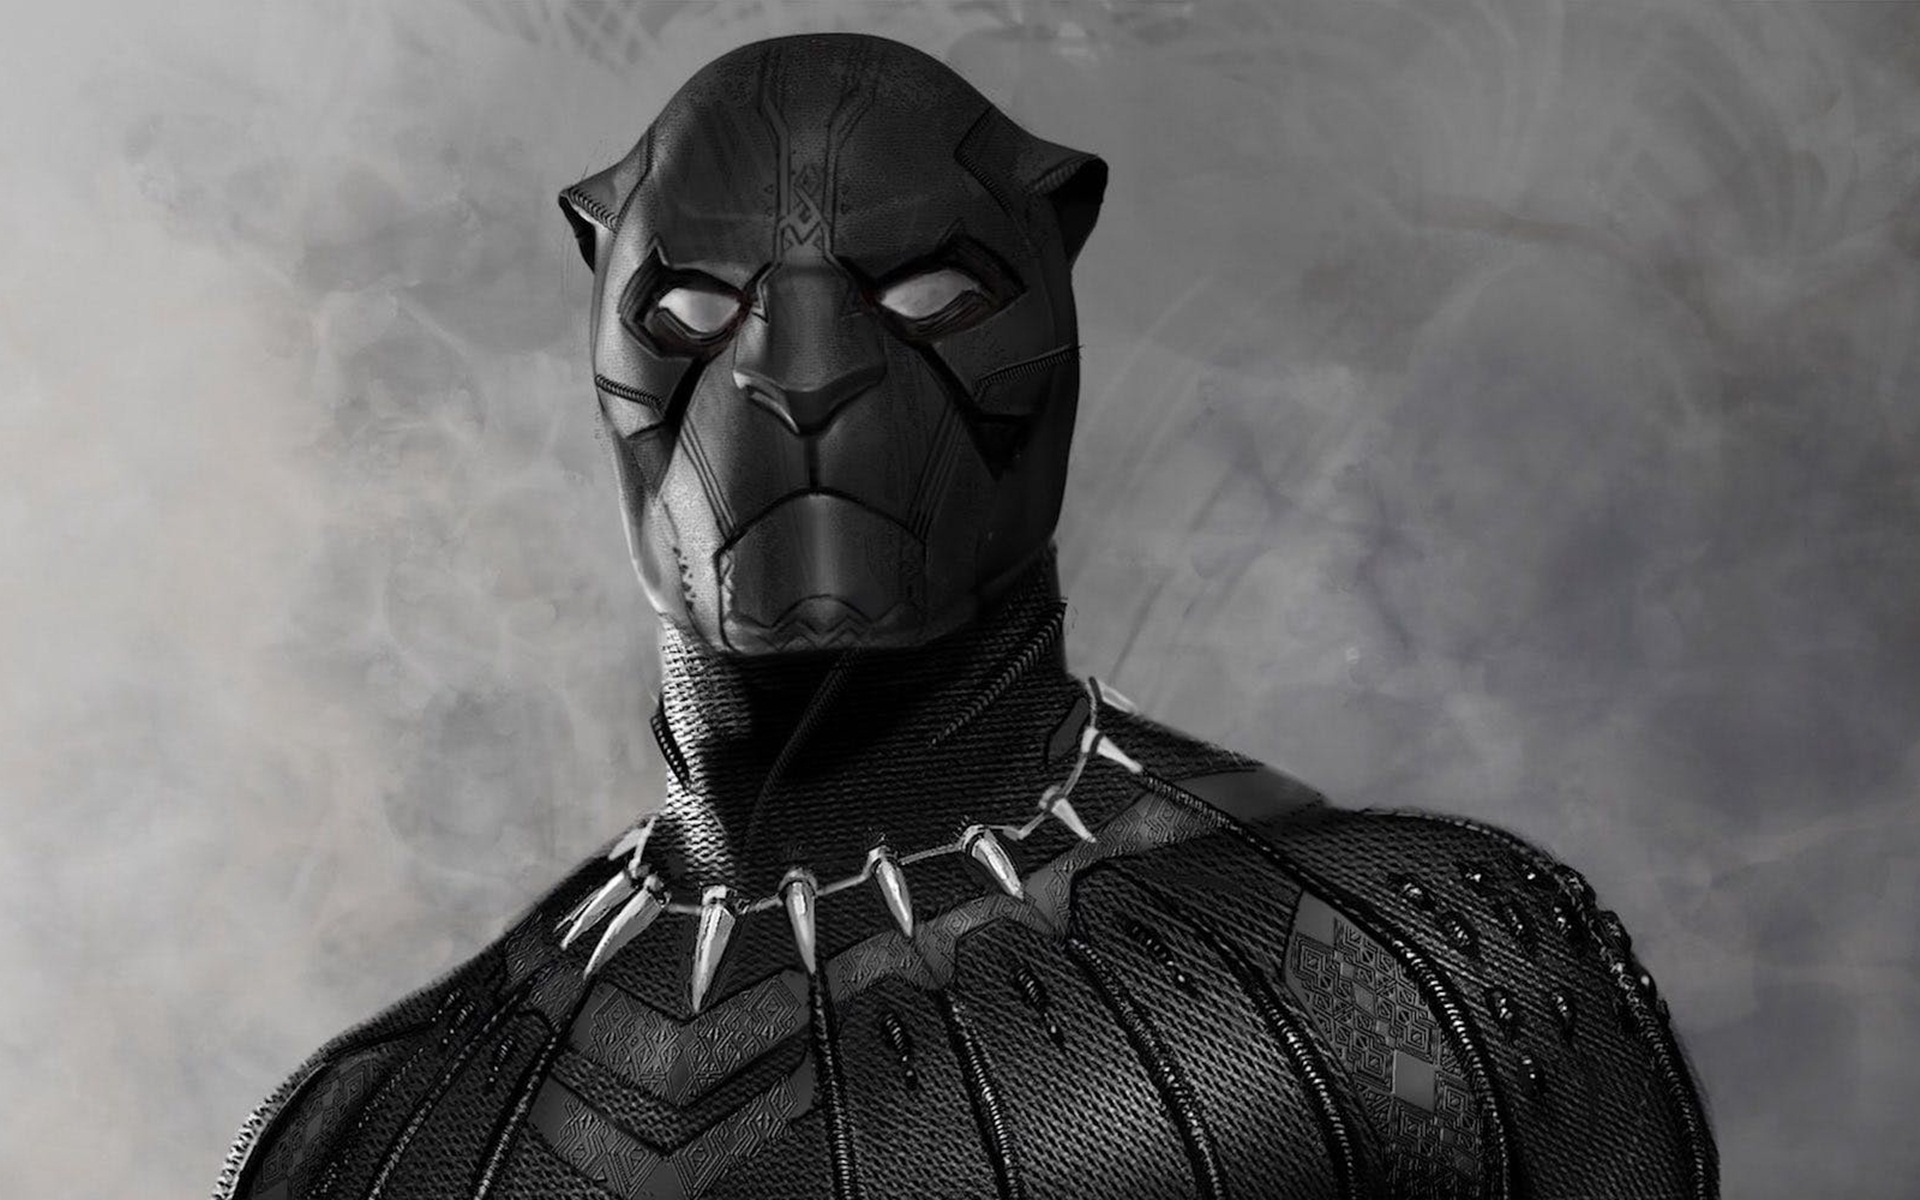 Black Panther Hd Wallpapers.